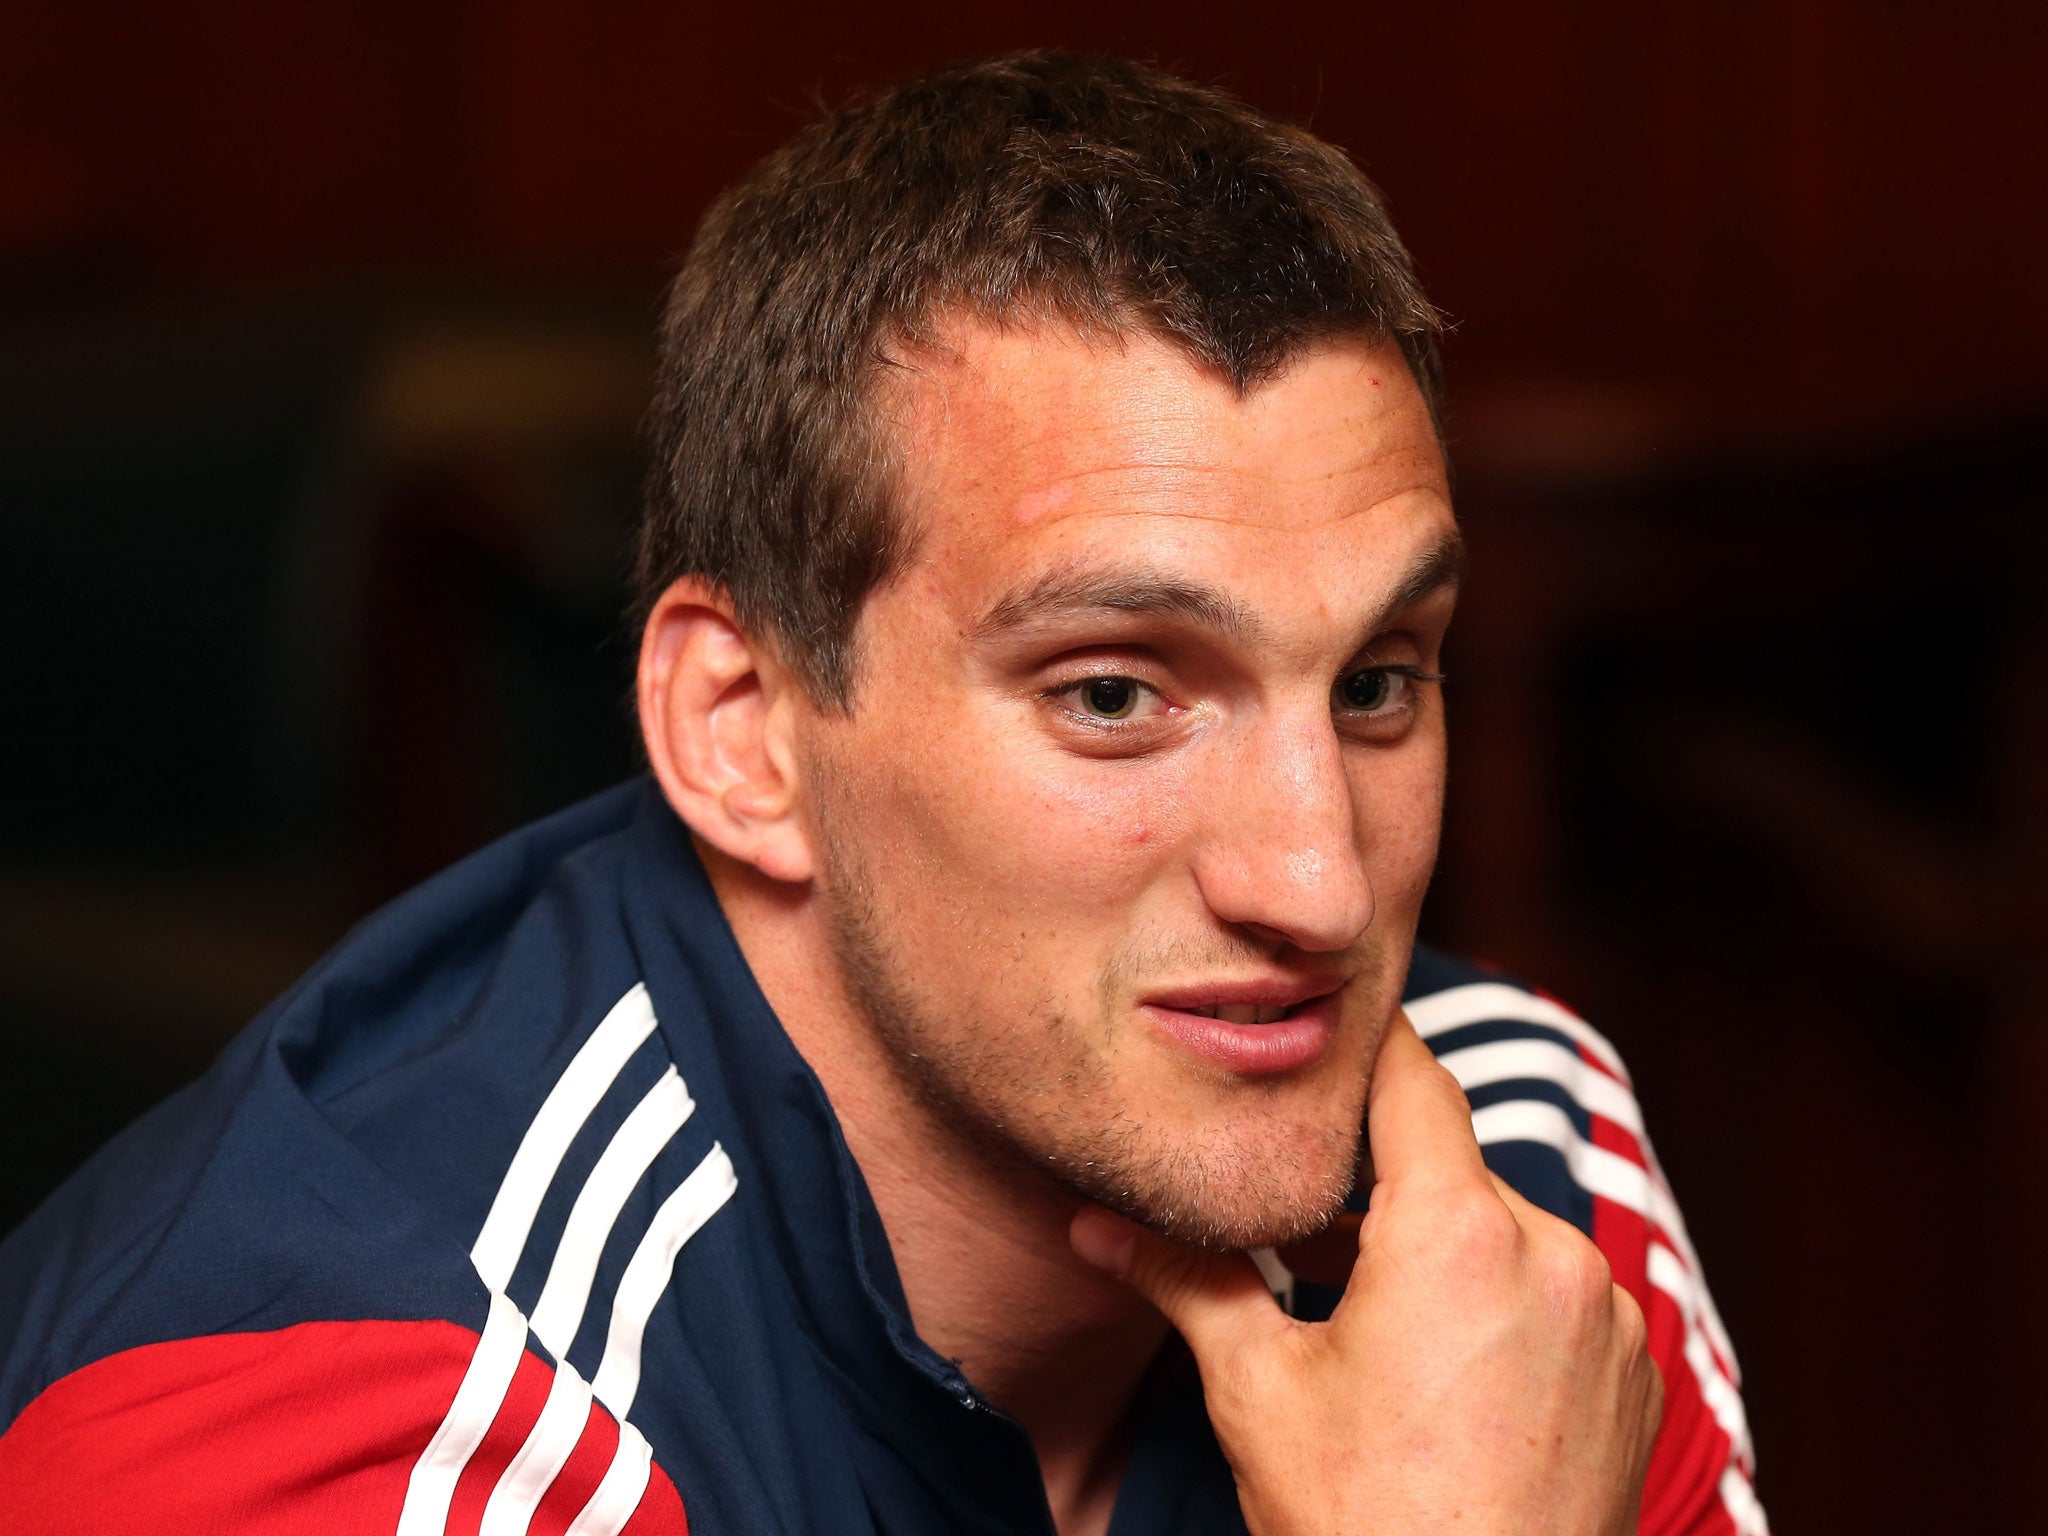 Sam Warburton proved himself a master of timing when he waited for the Six Nations decider with England in March to play his most convincing rugby of the season